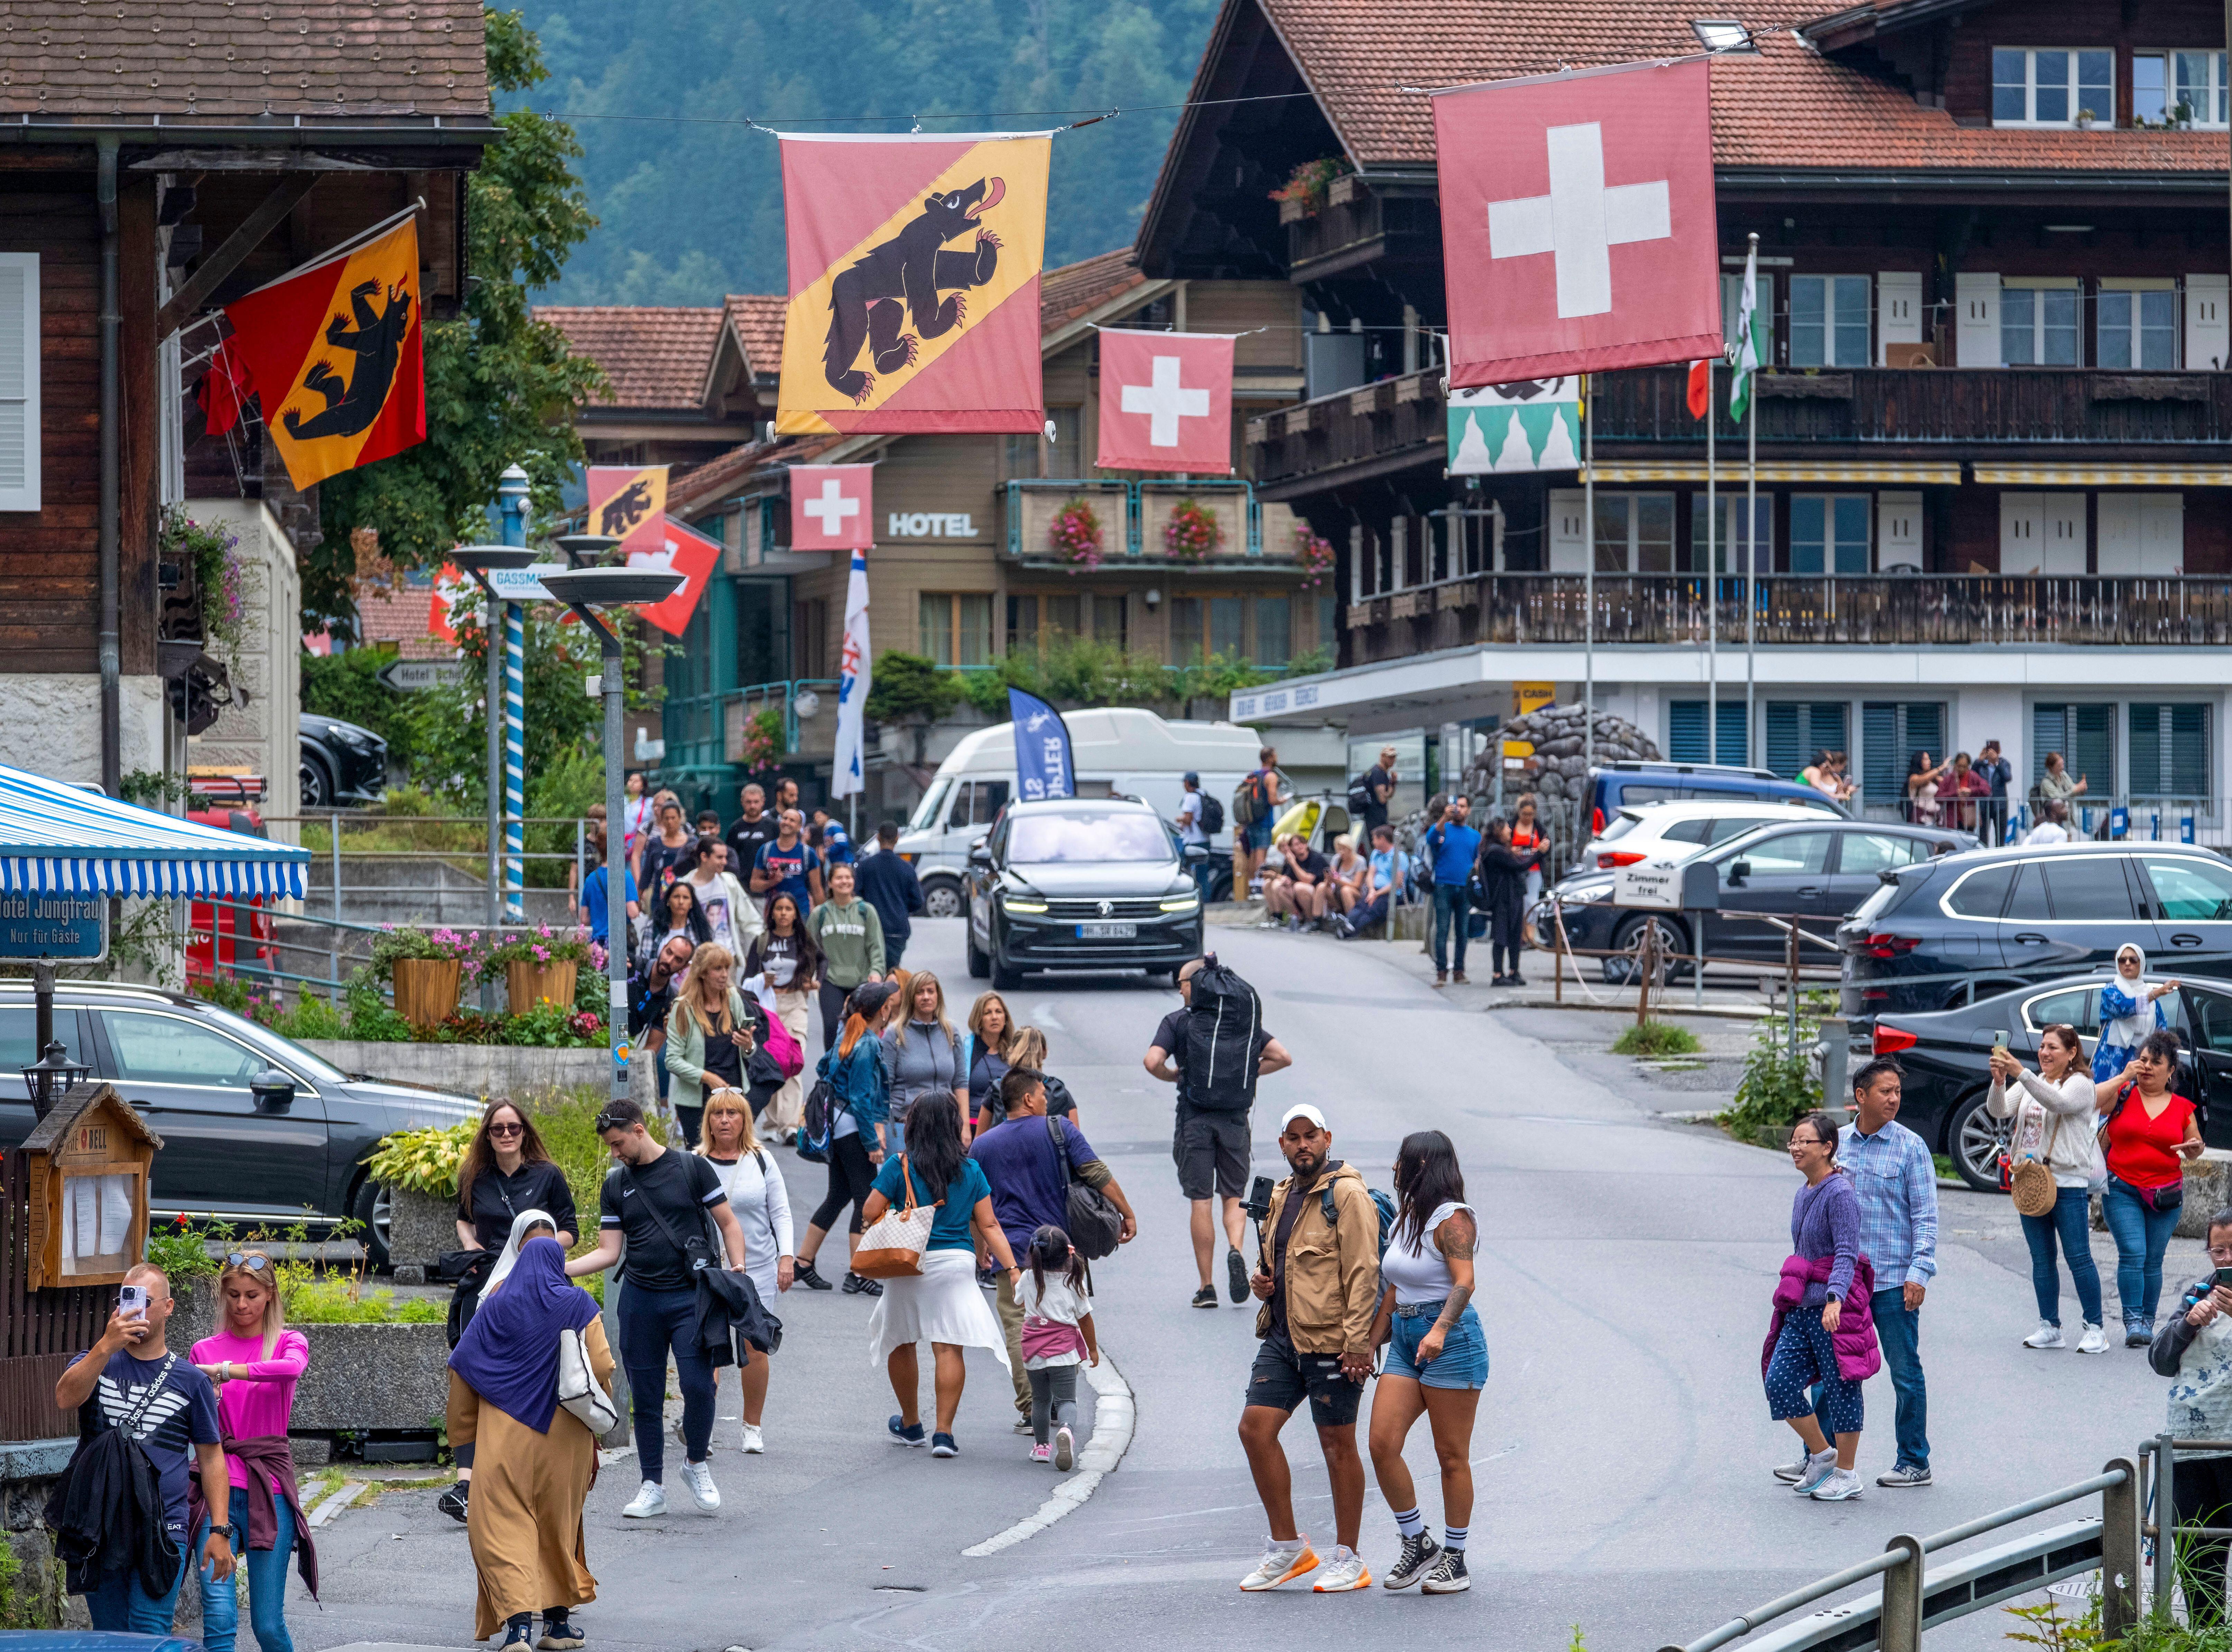 Lauterbrunnen is one of Switzerland’s most iconic destinations with its breathtaking scenery, sites like the Staubbach Falls and Alpine charm. But the small mountain village continues to attract a growing number of tourists.